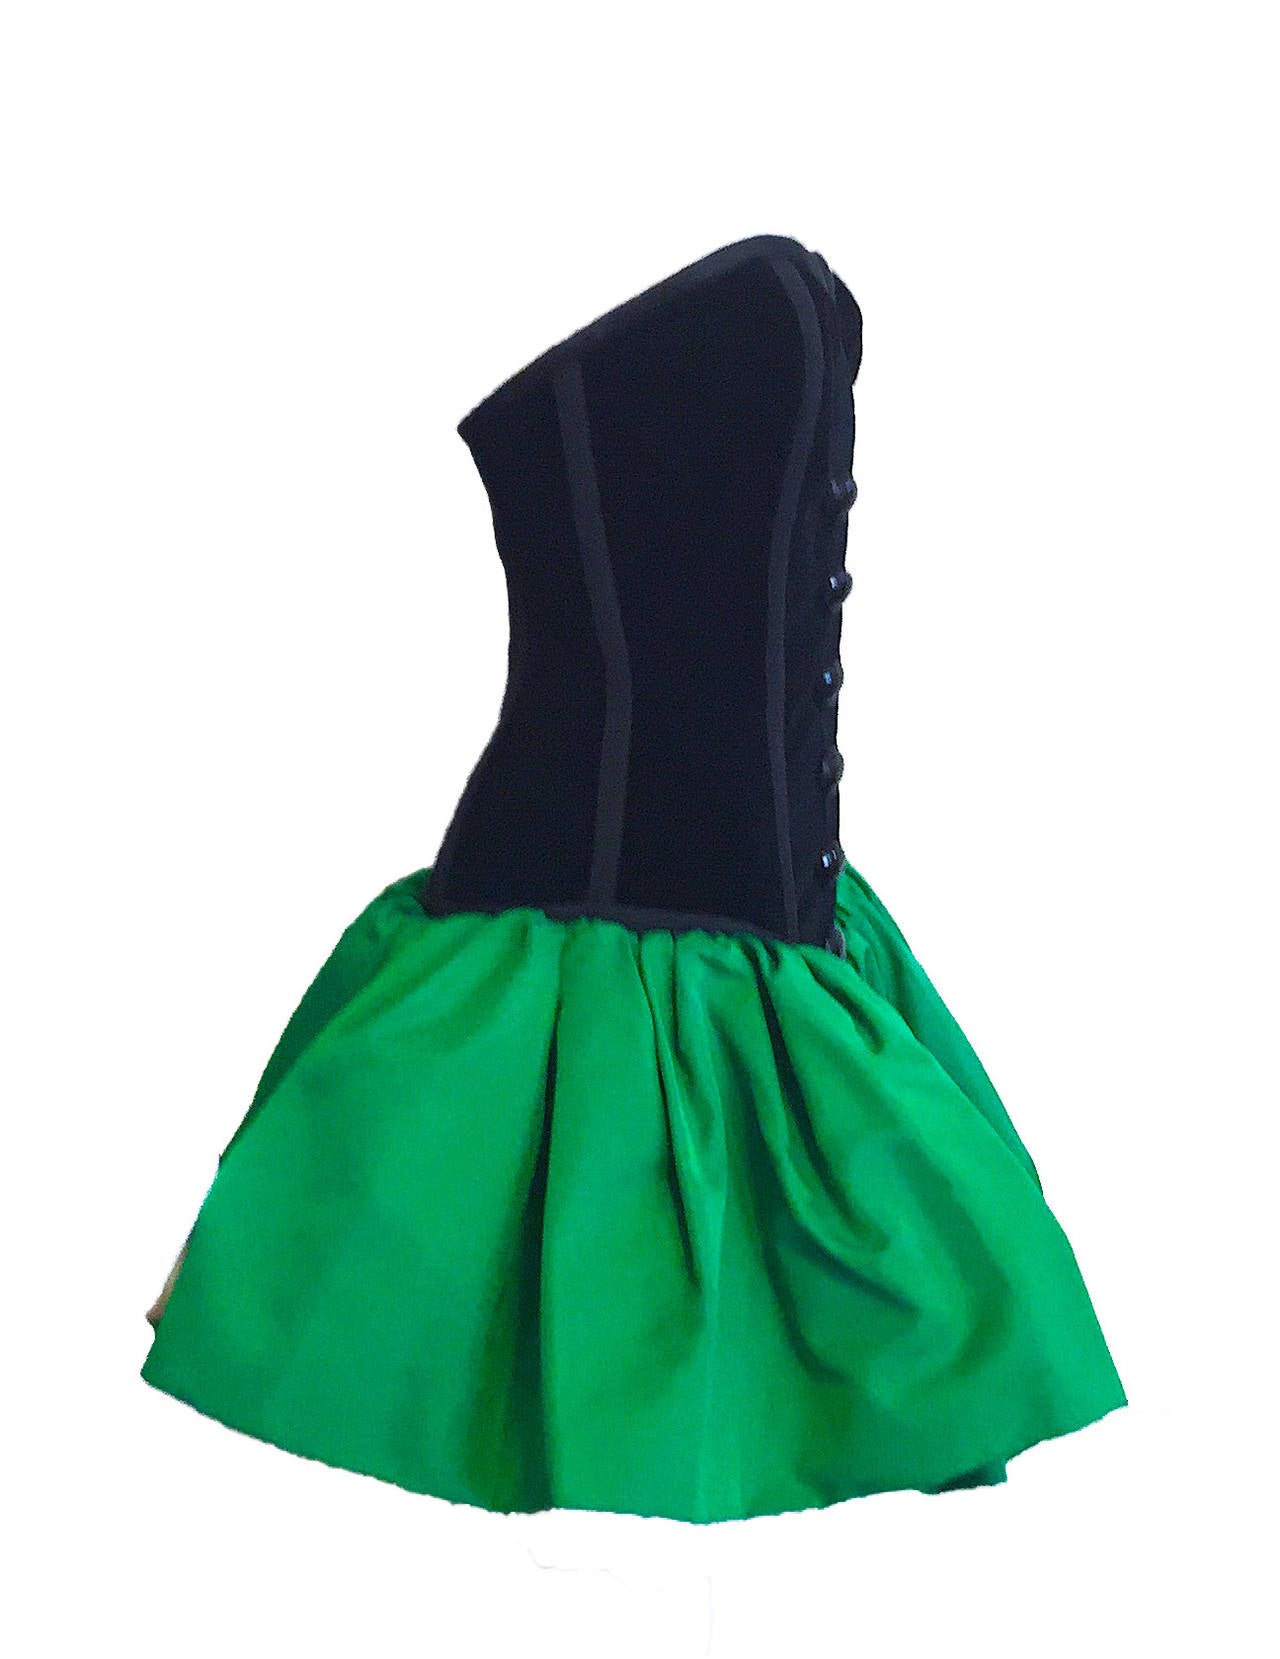 Rare, museum quality Yves Saint Laurent Rive Gauche YSL cocktail dress, circa 1986. This stunning dress features a velvet bustier with trim, black button embellishments and front zippered closure. The skirt is a vibrant emerald green taffeta with a